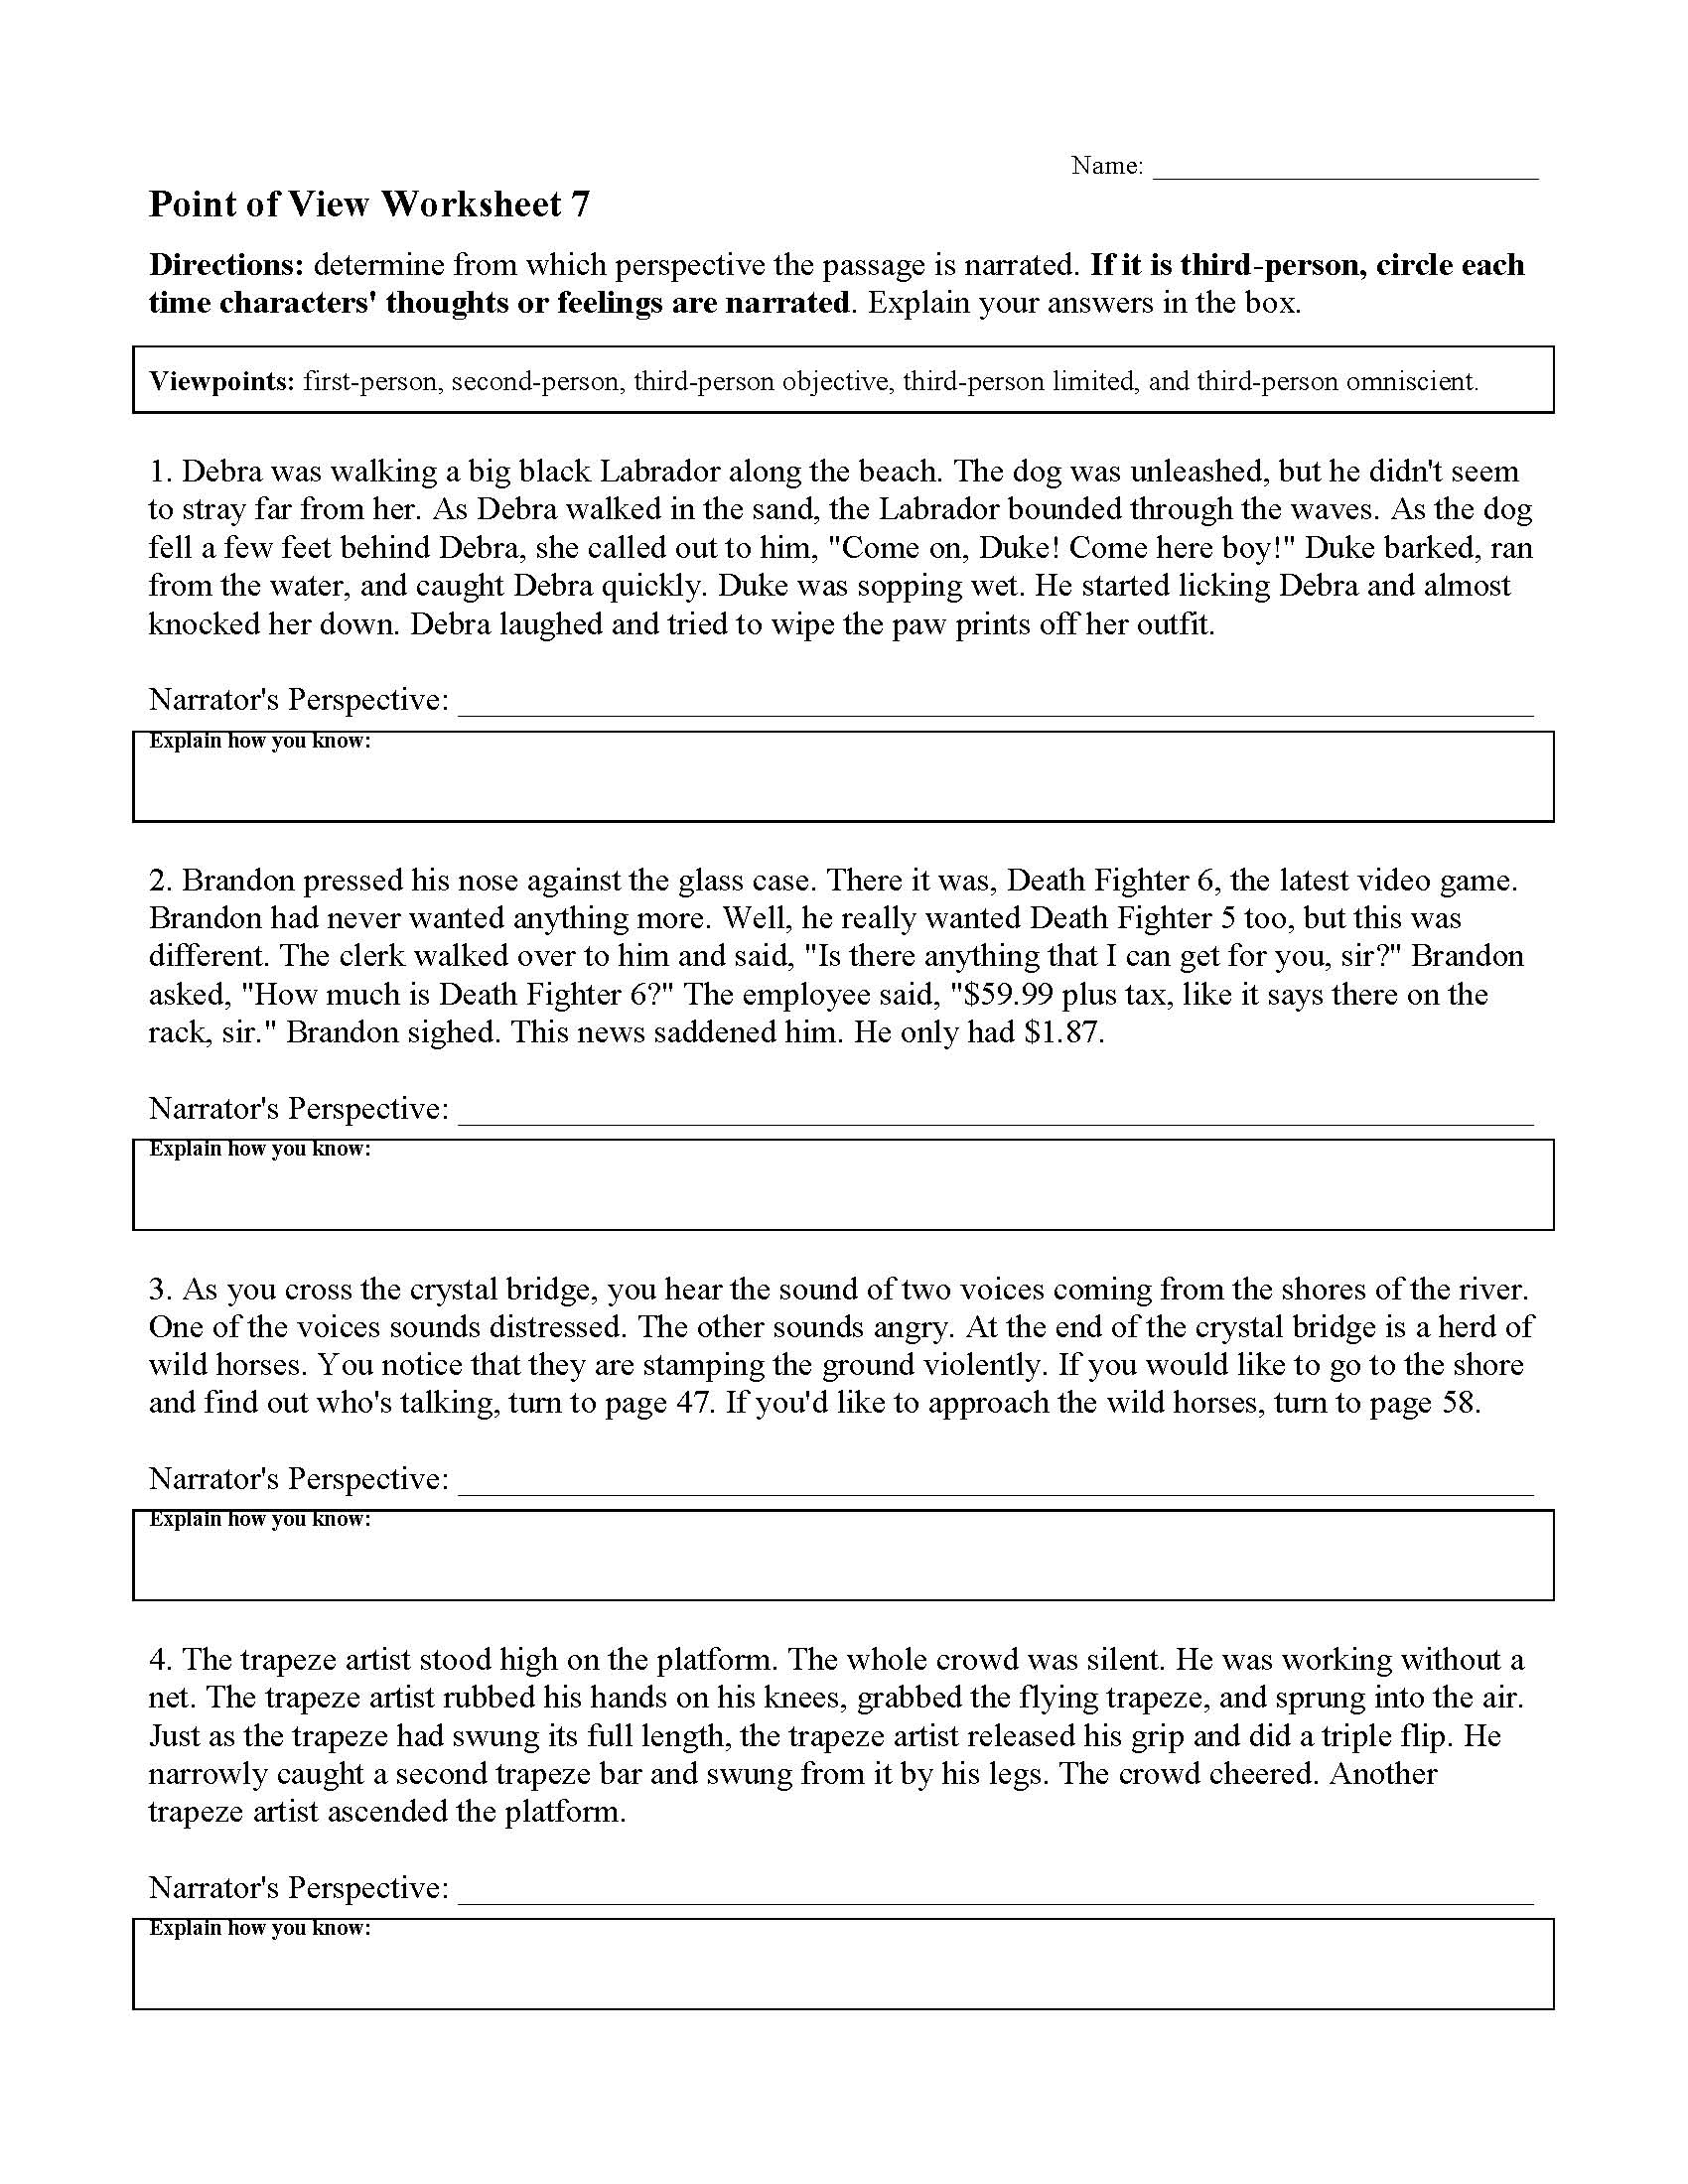 point-of-view-worksheet-7-preview